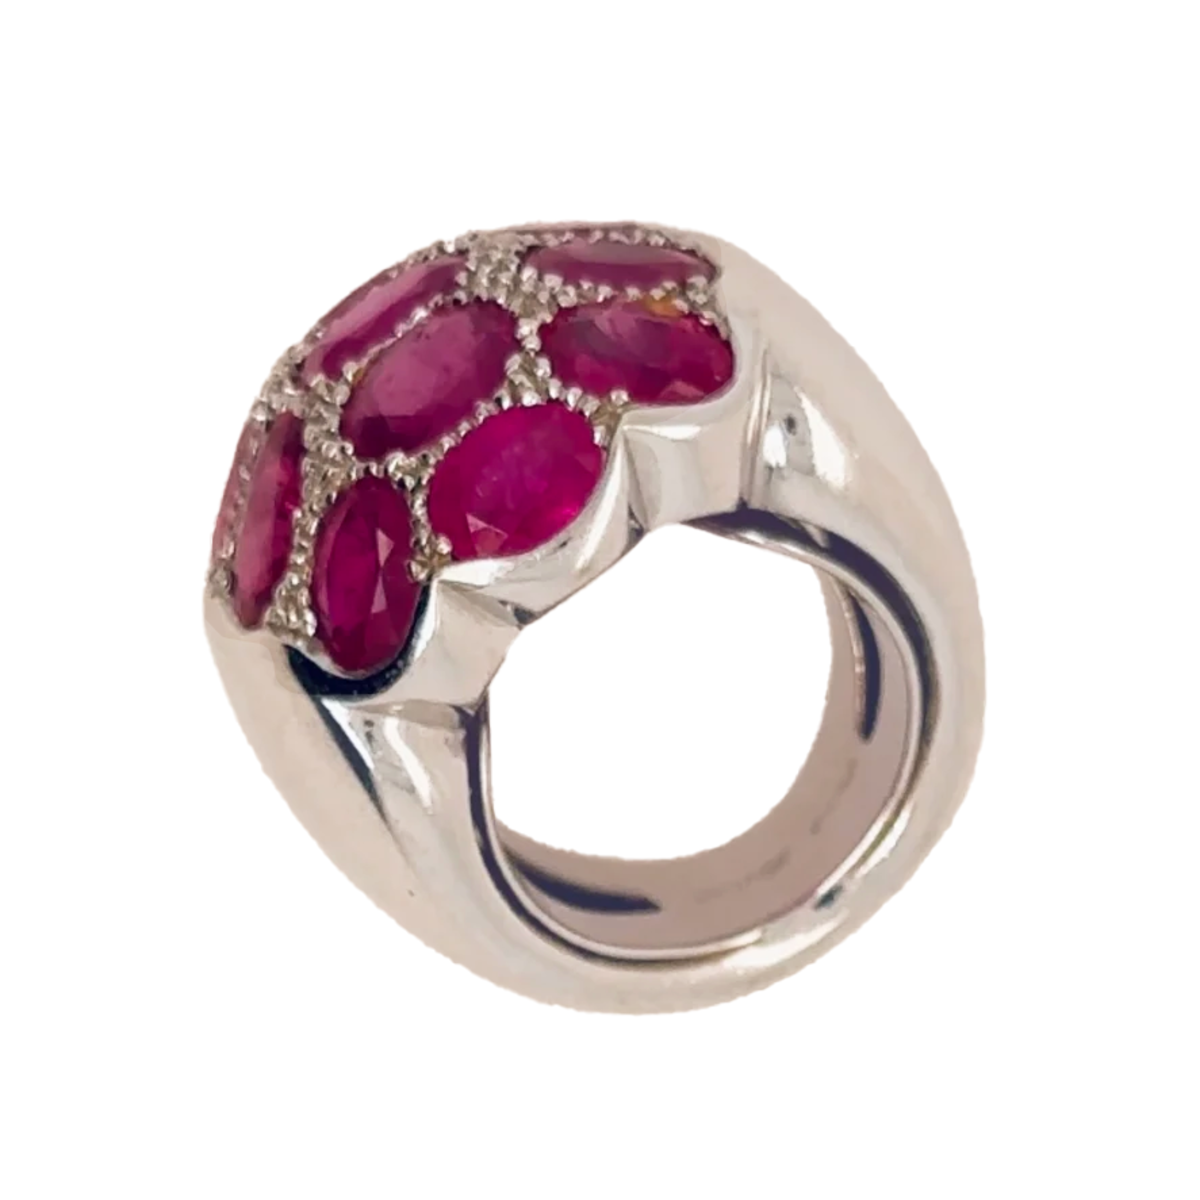 René Boivin 1980s 18KT White Gold Pink Sapphire Ring front top view